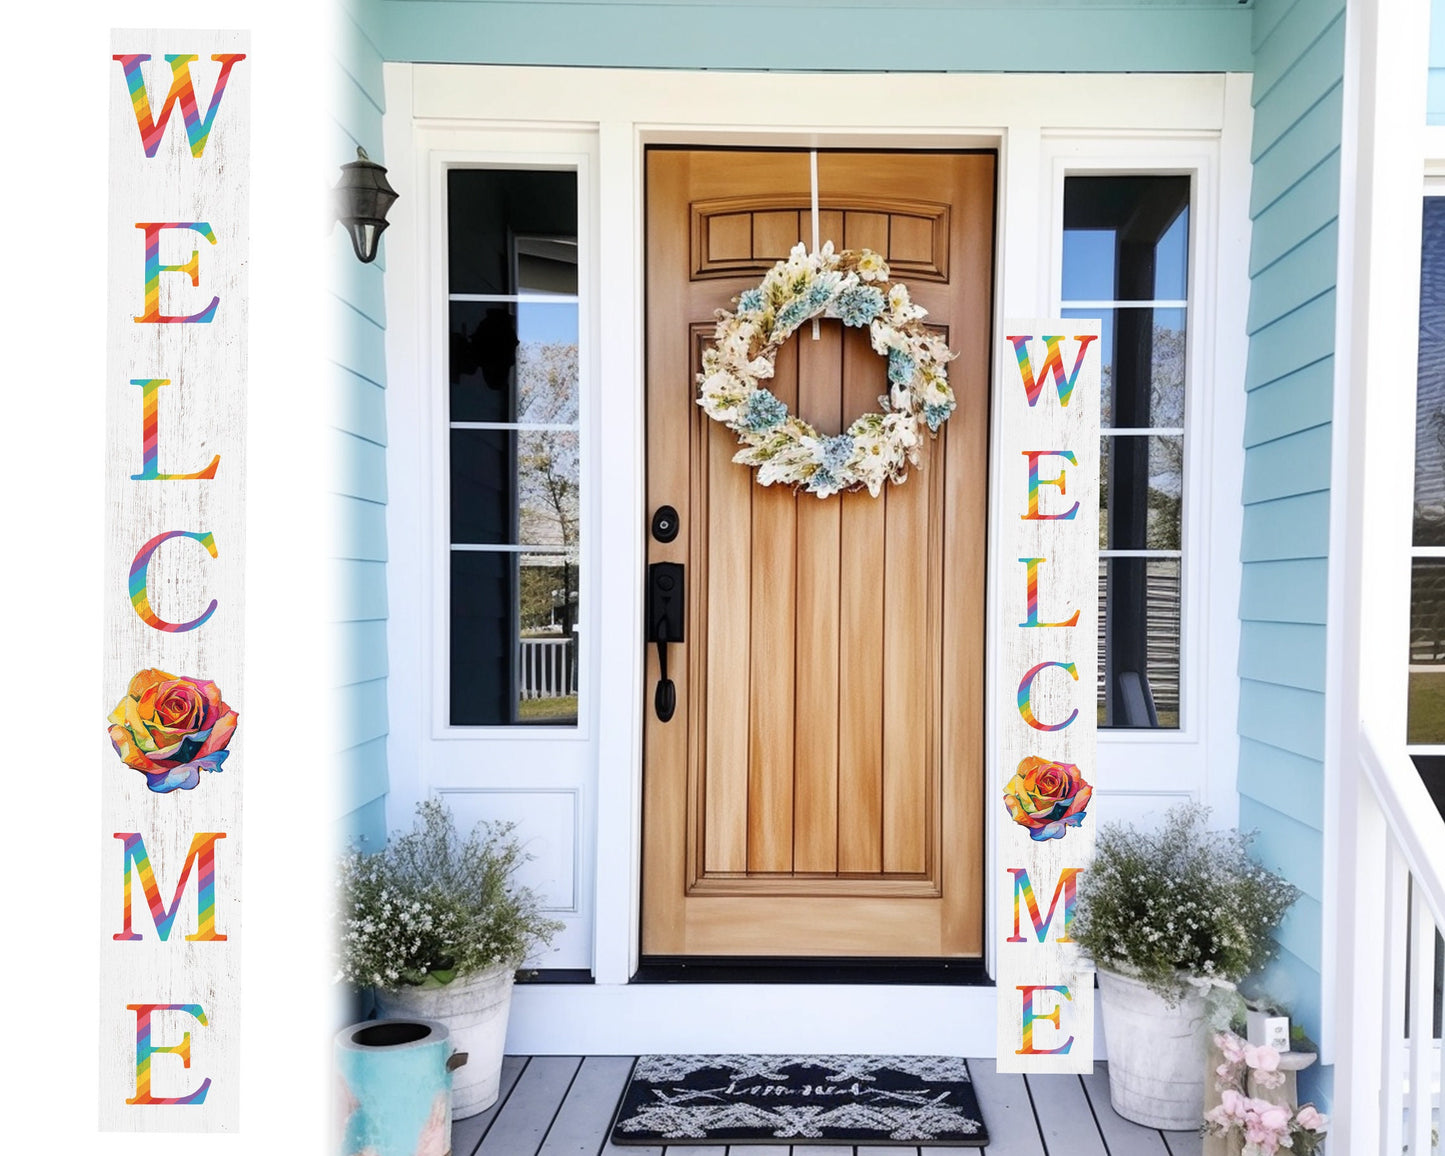 72-inch Pride LGBT White Outdoor Welcome Sign | Rustic Front Door Sign | Foldable and Portable | UV Protected and Sealed